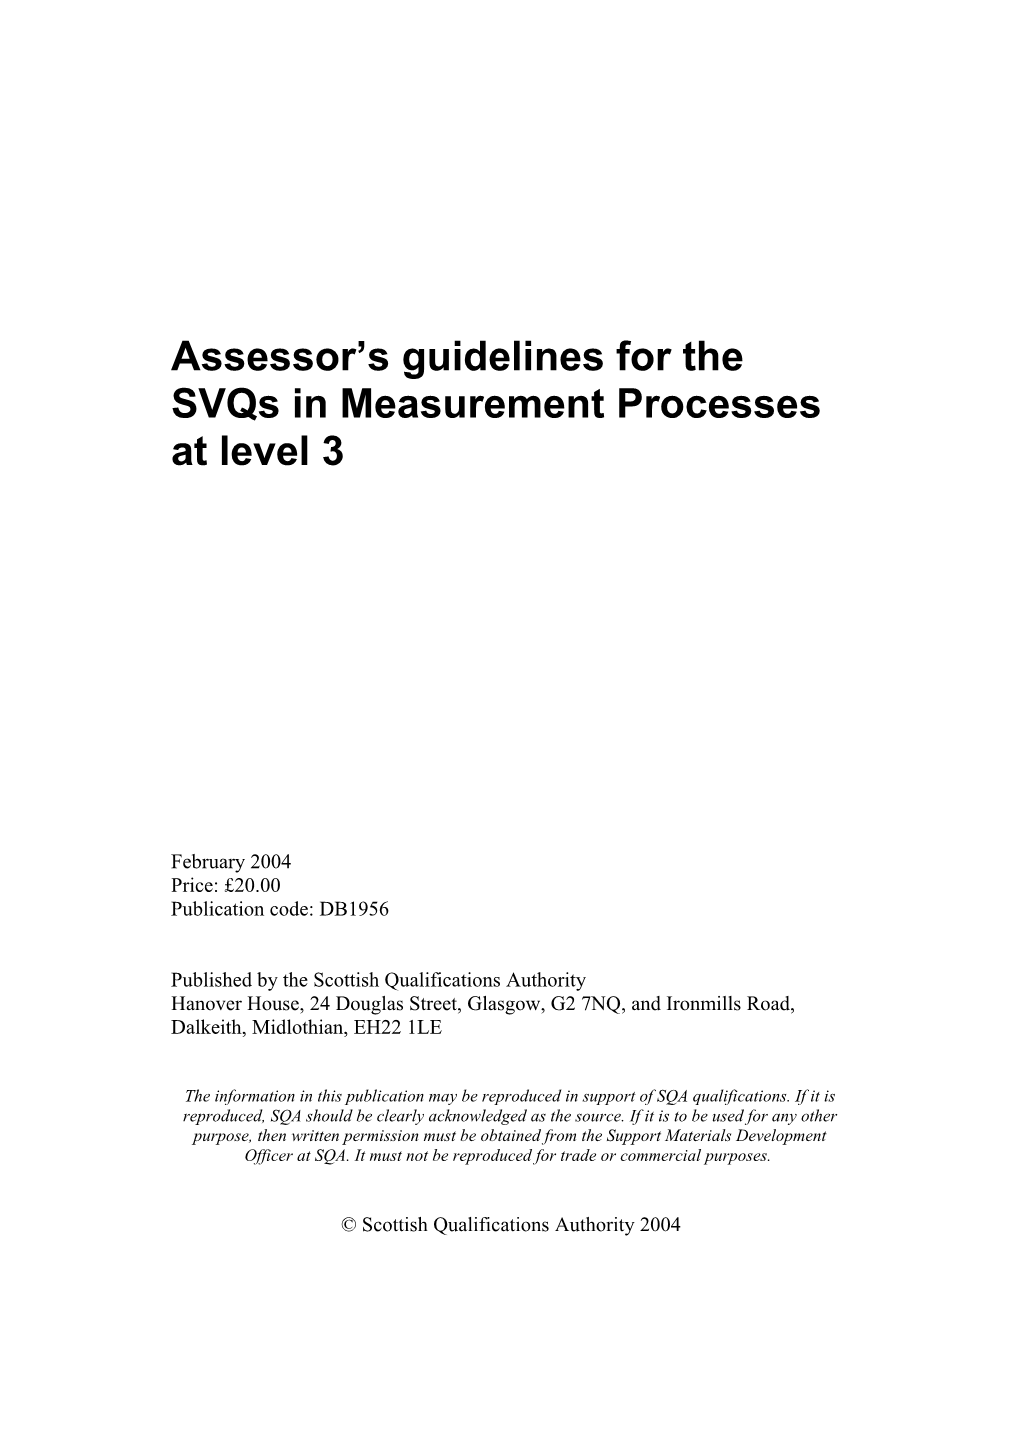 Assessor S Guidelines for the Svqs in Floristry at Levels 2 and 3